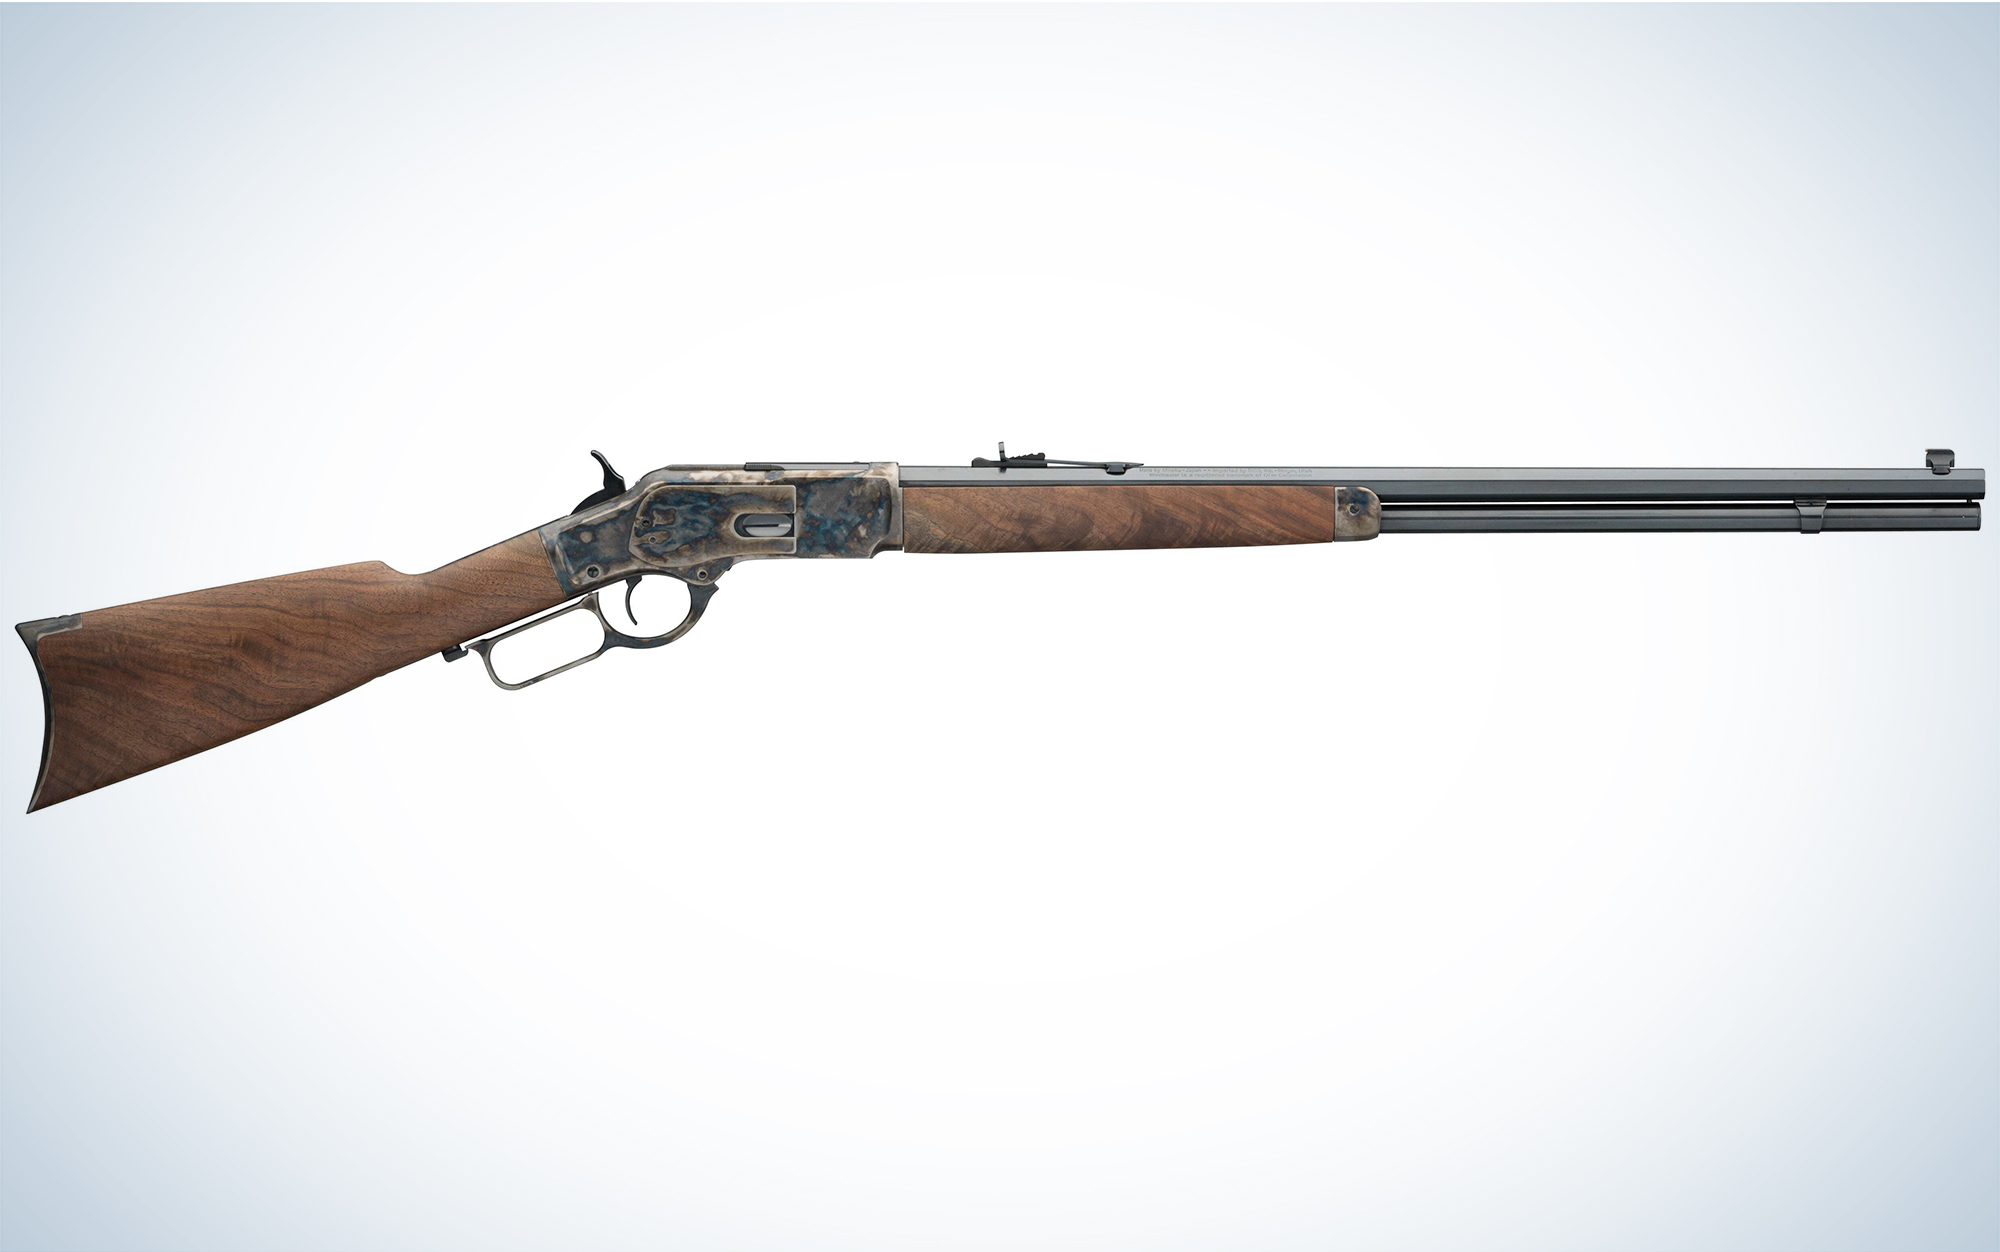 The Winchester 1886 is one of the best lever action rifles.